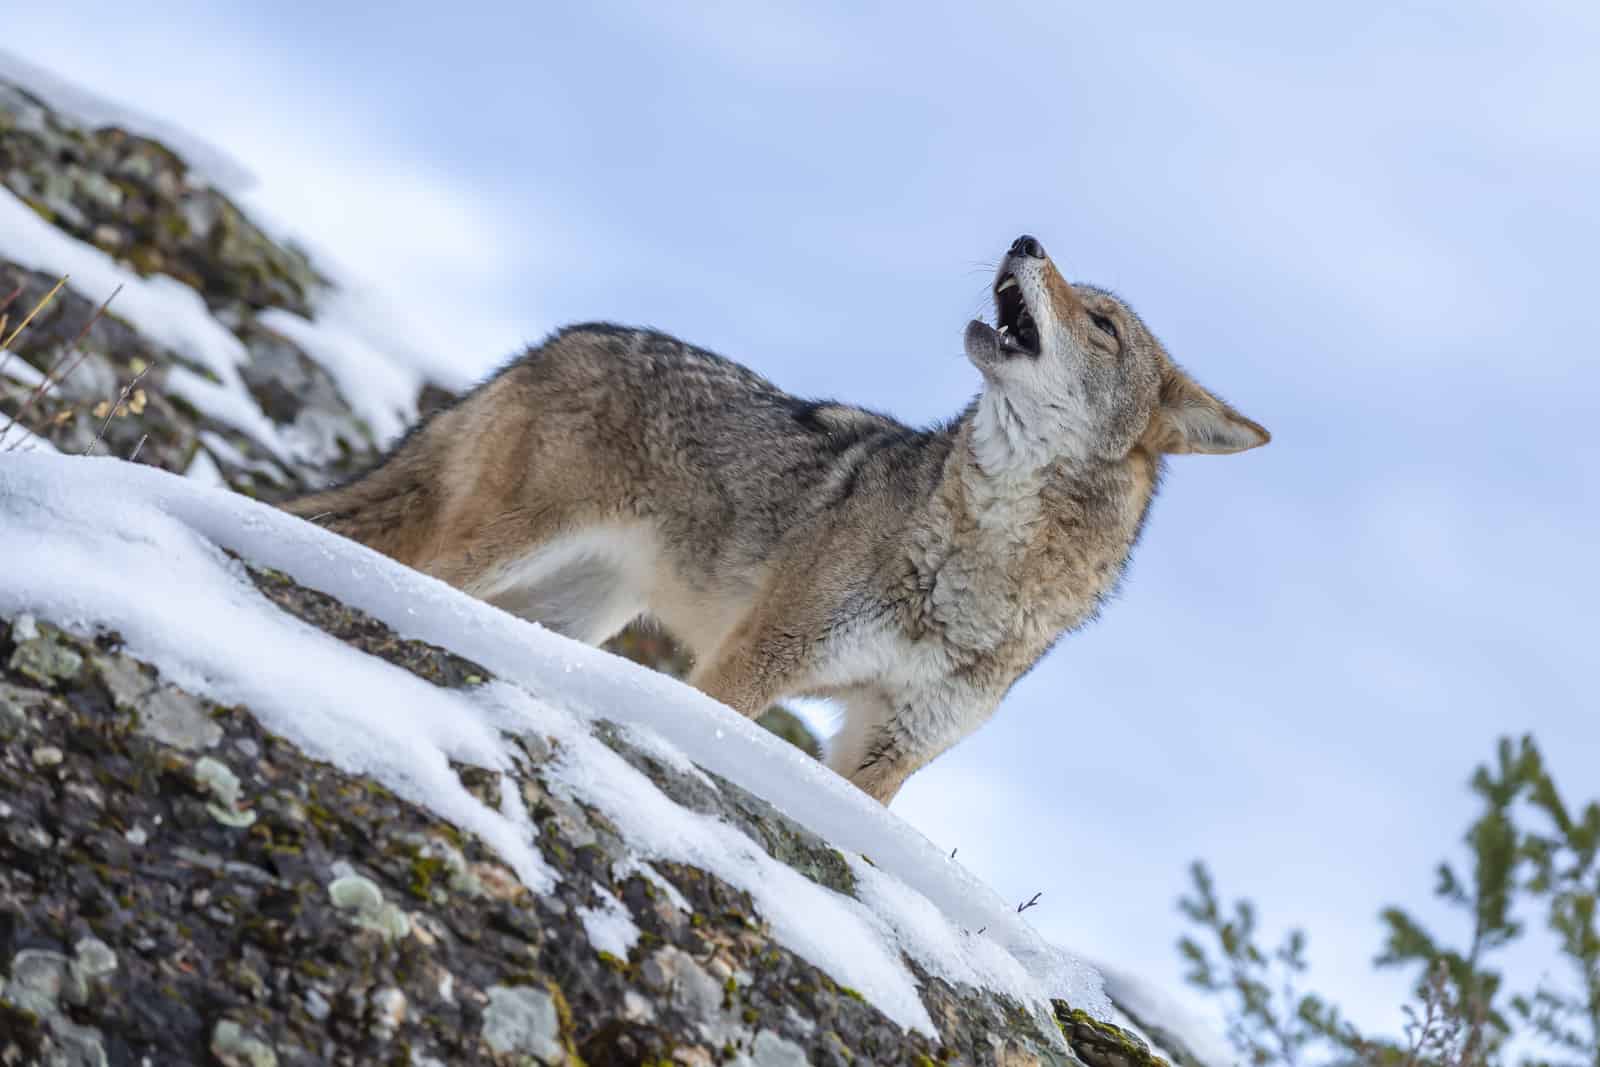 a fearless and majestic coyote stands proudly in the snowy mountain.